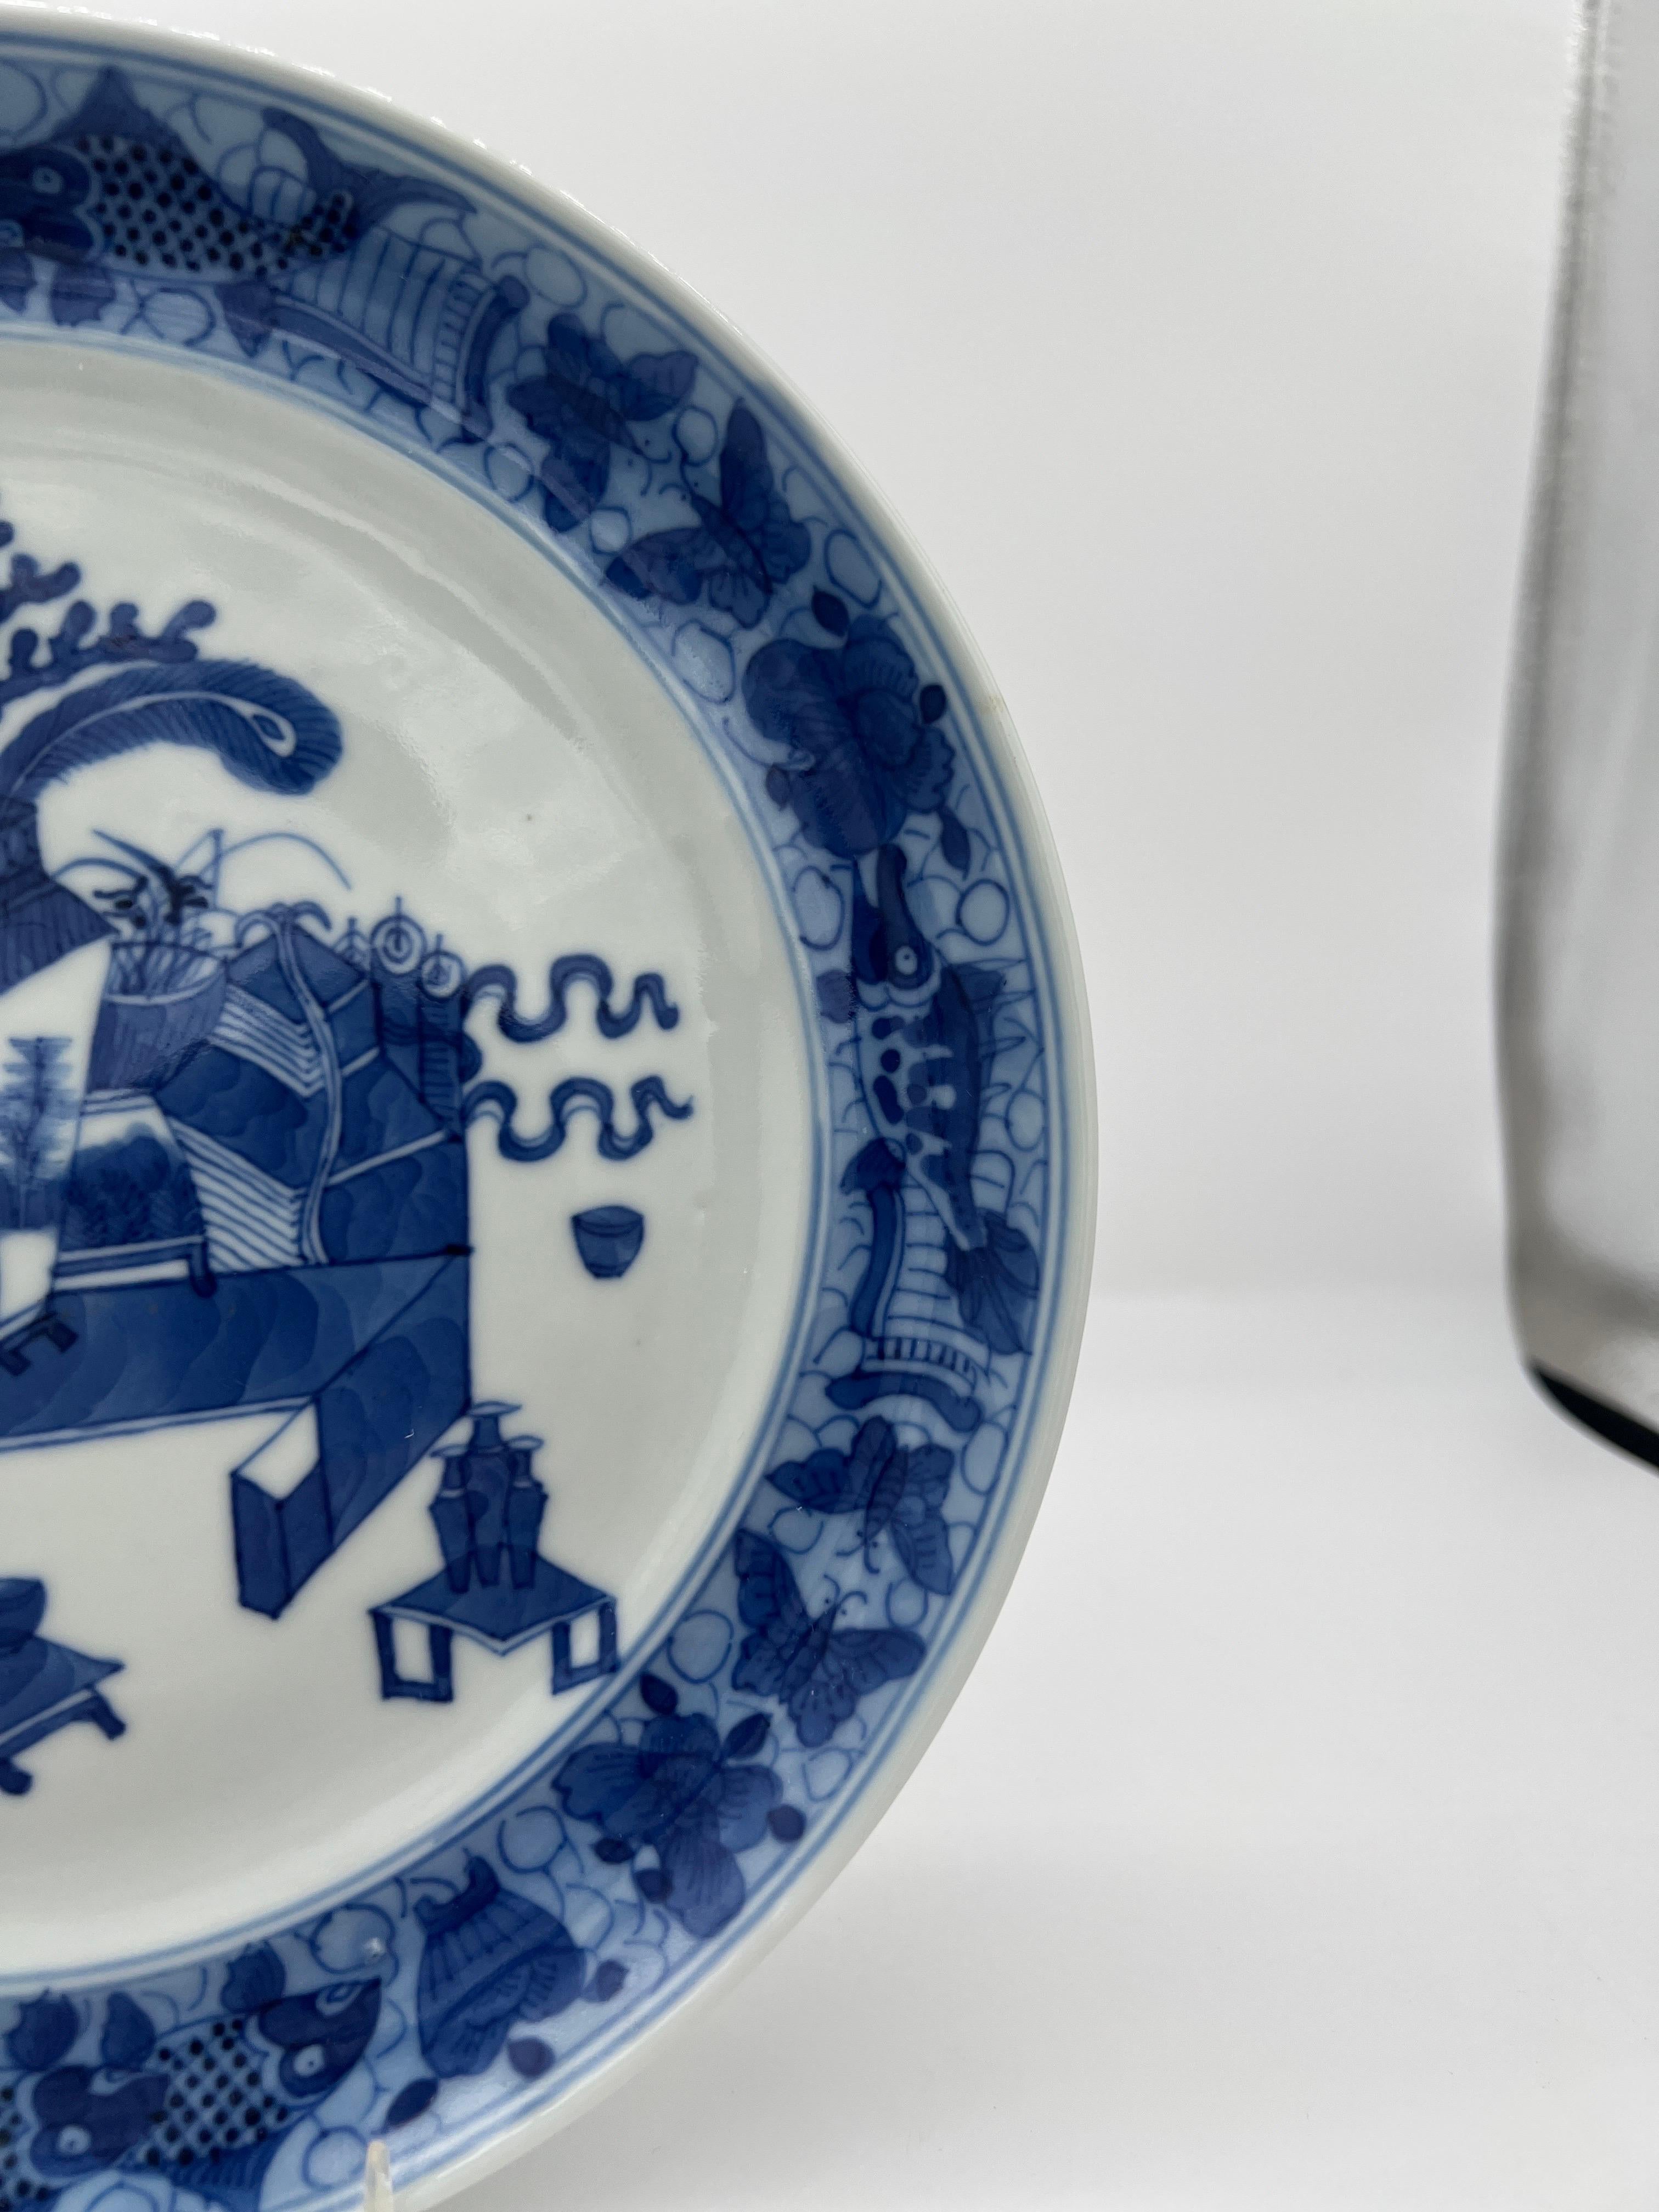 Chinese export blue & white plate, ‘precious objects’, c.1780 In Good Condition For Sale In Atlanta, GA